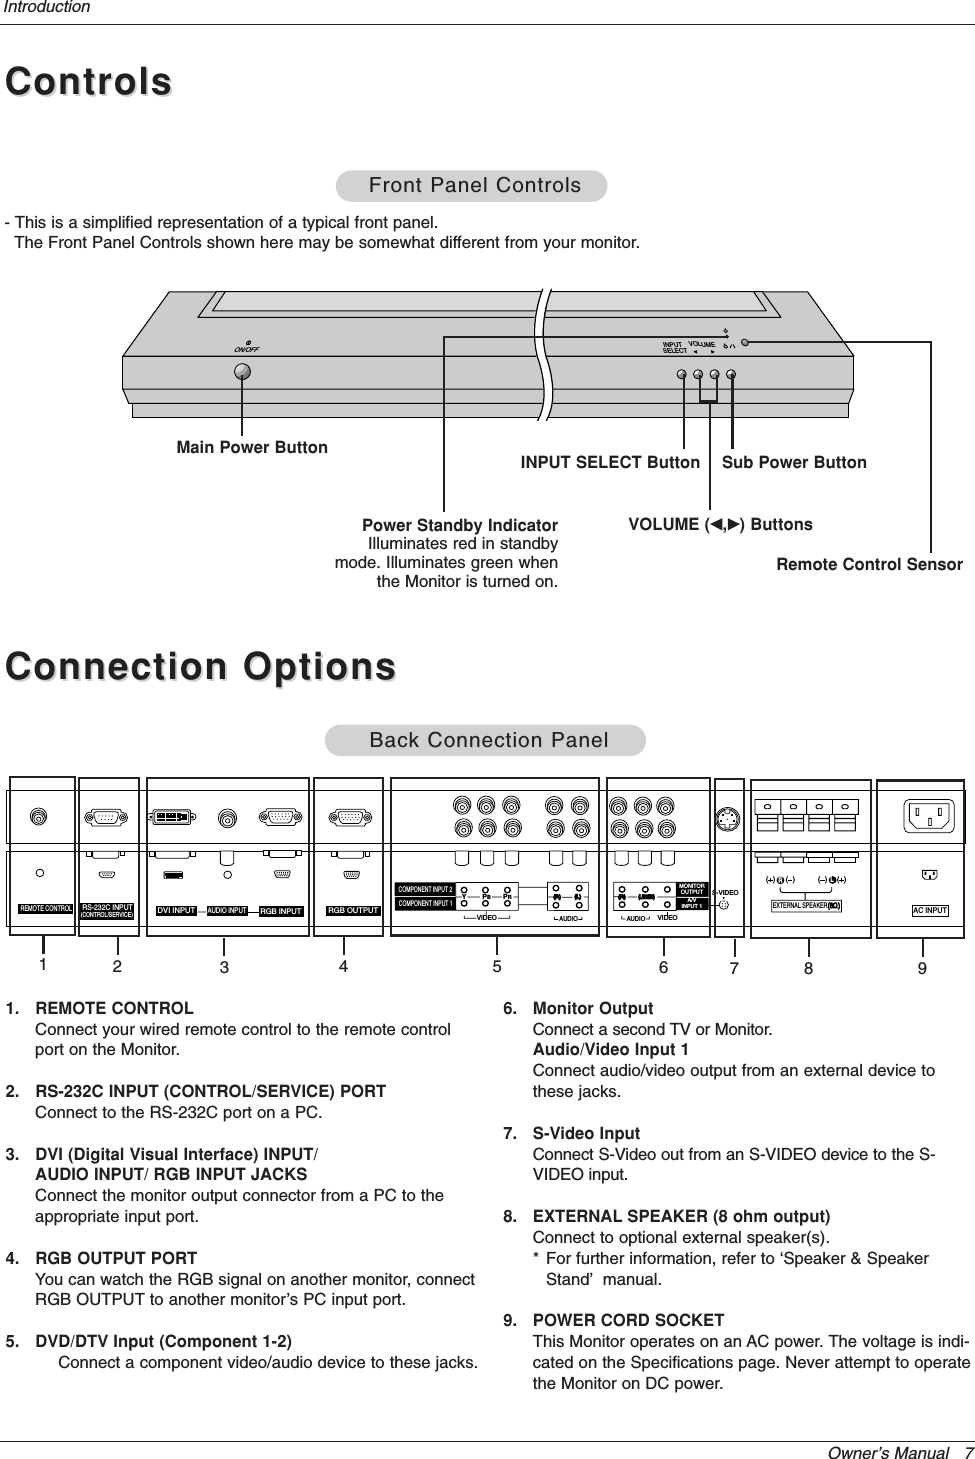 Owner’s Manual   7IntroductionControlsControlsConnection OptionsConnection OptionsRS-232C INPUT(CONTROL/SERVICE)YPBPRAC INPUTAUDIO INPUT(  )(  )(  )(  )EXTERNAL SPEAKERDVI INPUT RGB INPUT RGB OUTPUTREMOTE CONTROLS-VIDEOAUDIOVIDEOMONITOROUTPUTA/VINPUT 1(R) (L)VIDEO(R)(L/MONO)(L/MONO)RLAUDIOCOMPONENT INPUT 2COMPONENT INPUT 151. REMOTE CONTROLConnect your wired remote control to the remote controlport on the Monitor.2. RS-232C INPUT (CONTROL/SERVICE) PORTConnect to the RS-232C port on a PC.3. DVI (Digital Visual Interface) INPUT/AUDIO INPUT/ RGB INPUT JACKSConnect the monitor output connector from a PC to theappropriate input port.4. RGB OUTPUT PORTYou can watch the RGB signal on another monitor, connectRGB OUTPUT to another monitor’s PC input port.5. DVD/DTV Input (Component 1-2)Connect a component video/audio device to these jacks.6. Monitor OutputConnect a second TV or Monitor.Audio/Video Input 1Connect audio/video output from an external device tothese jacks.7. S-Video InputConnect S-Video out from an S-VIDEO device to the S-VIDEO input.8. EXTERNAL SPEAKER (8 ohm output)Connect to optional external speaker(s).* For further information, refer to ‘Speaker &amp; SpeakerStand’manual.9. POWER CORD SOCKETThis Monitor operates on an AC power. The voltage is indi-cated on the Specifications page. Never attempt to operatethe Monitor on DC power.Back Connection PanelBack Connection PanelVOLUME  INPUT SELECTON/OFFMain Power Button INPUT SELECT ButtonVOLUME (F,G) ButtonsRemote Control SensorPower Standby IndicatorIlluminates red in standbymode. Illuminates green whenthe Monitor is turned on.Sub Power ButtonFront Panel ControlsFront Panel Controls13427 86- This is a simplified representation of a typical front panel. The Front Panel Controls shown here may be somewhat different from your monitor.9